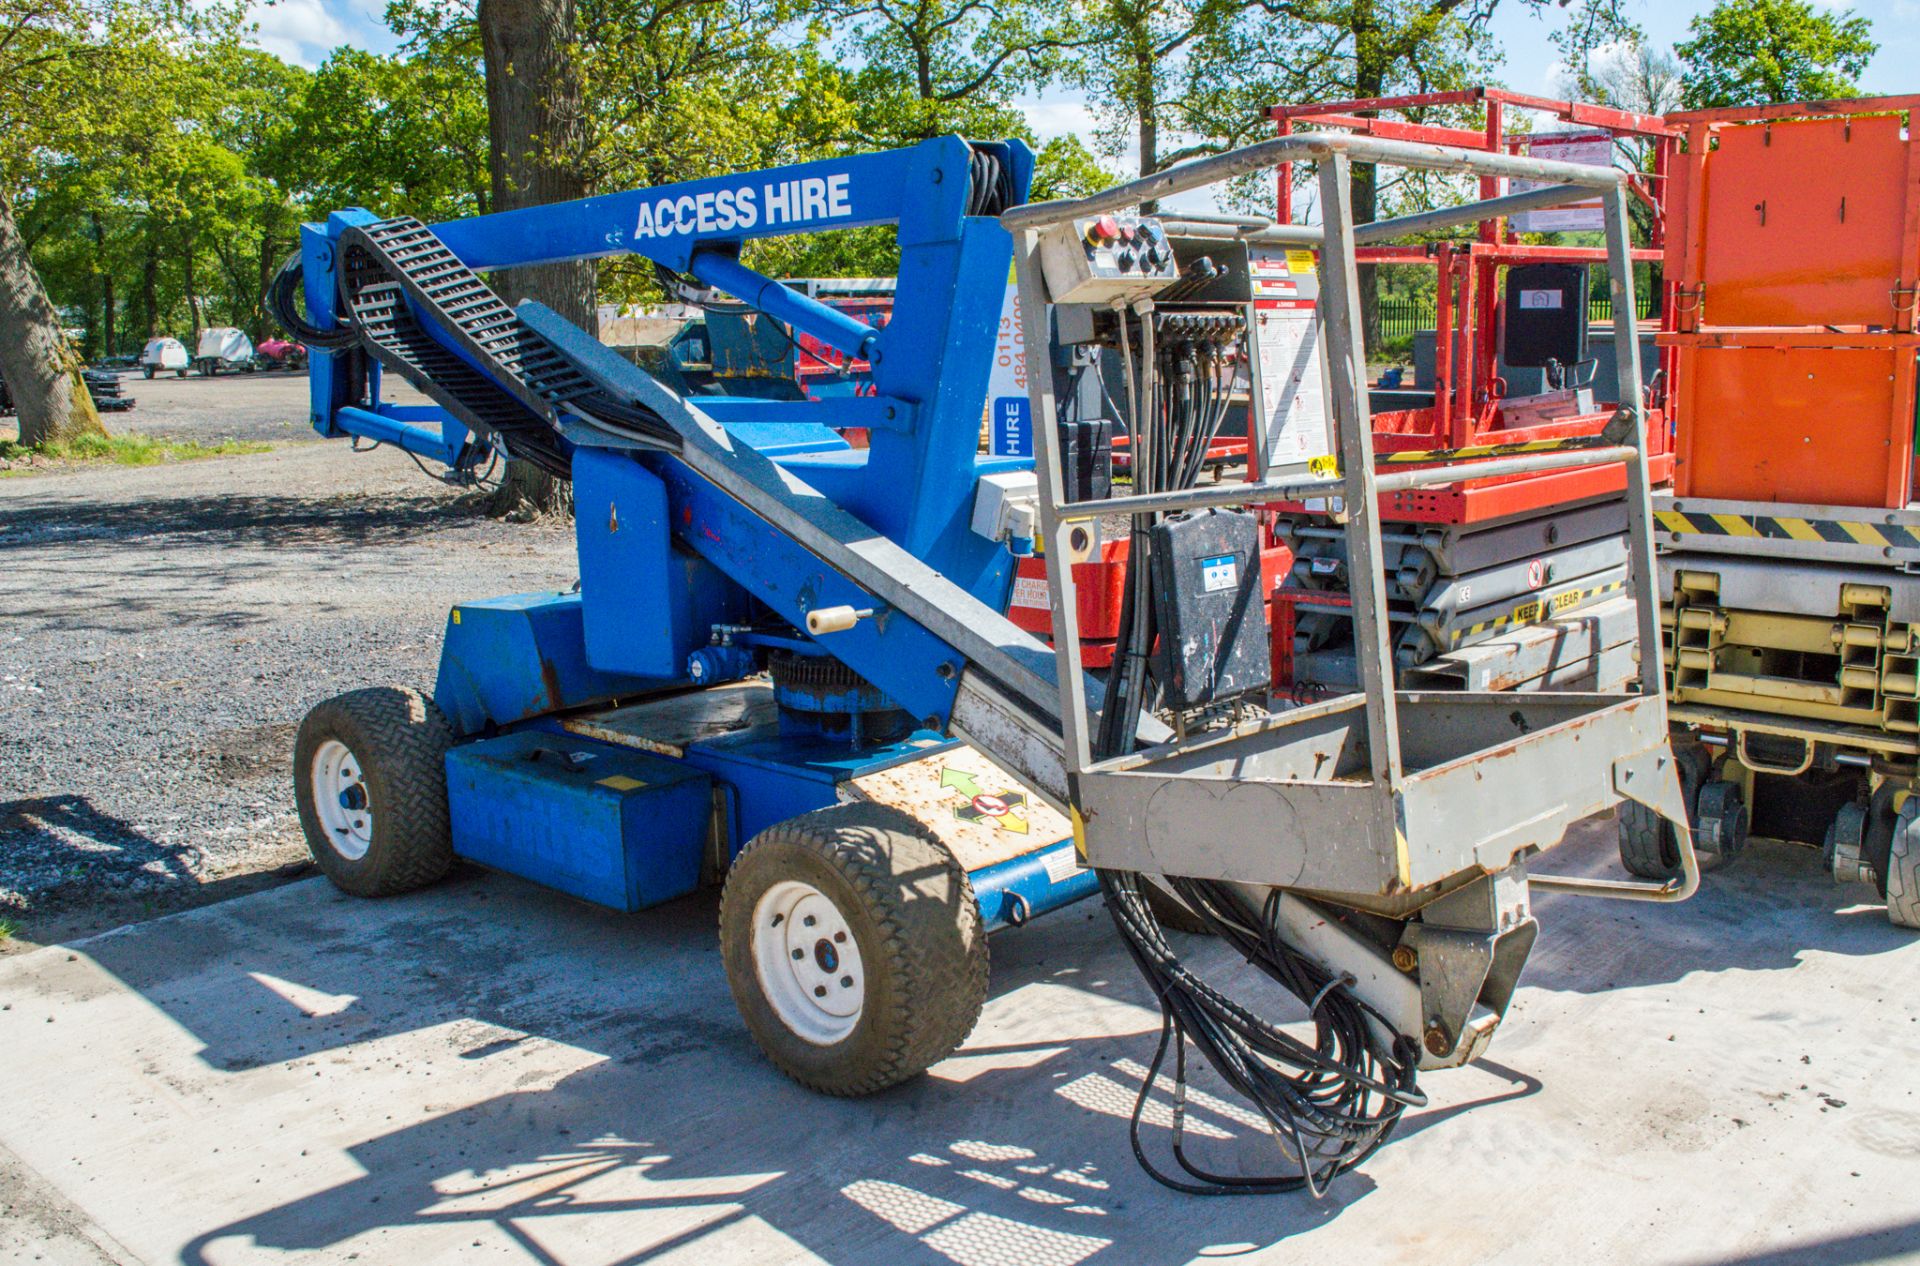 Nifty HR12 Hybrid battery electric/diesel driven articulated boom lift access platform S/N: